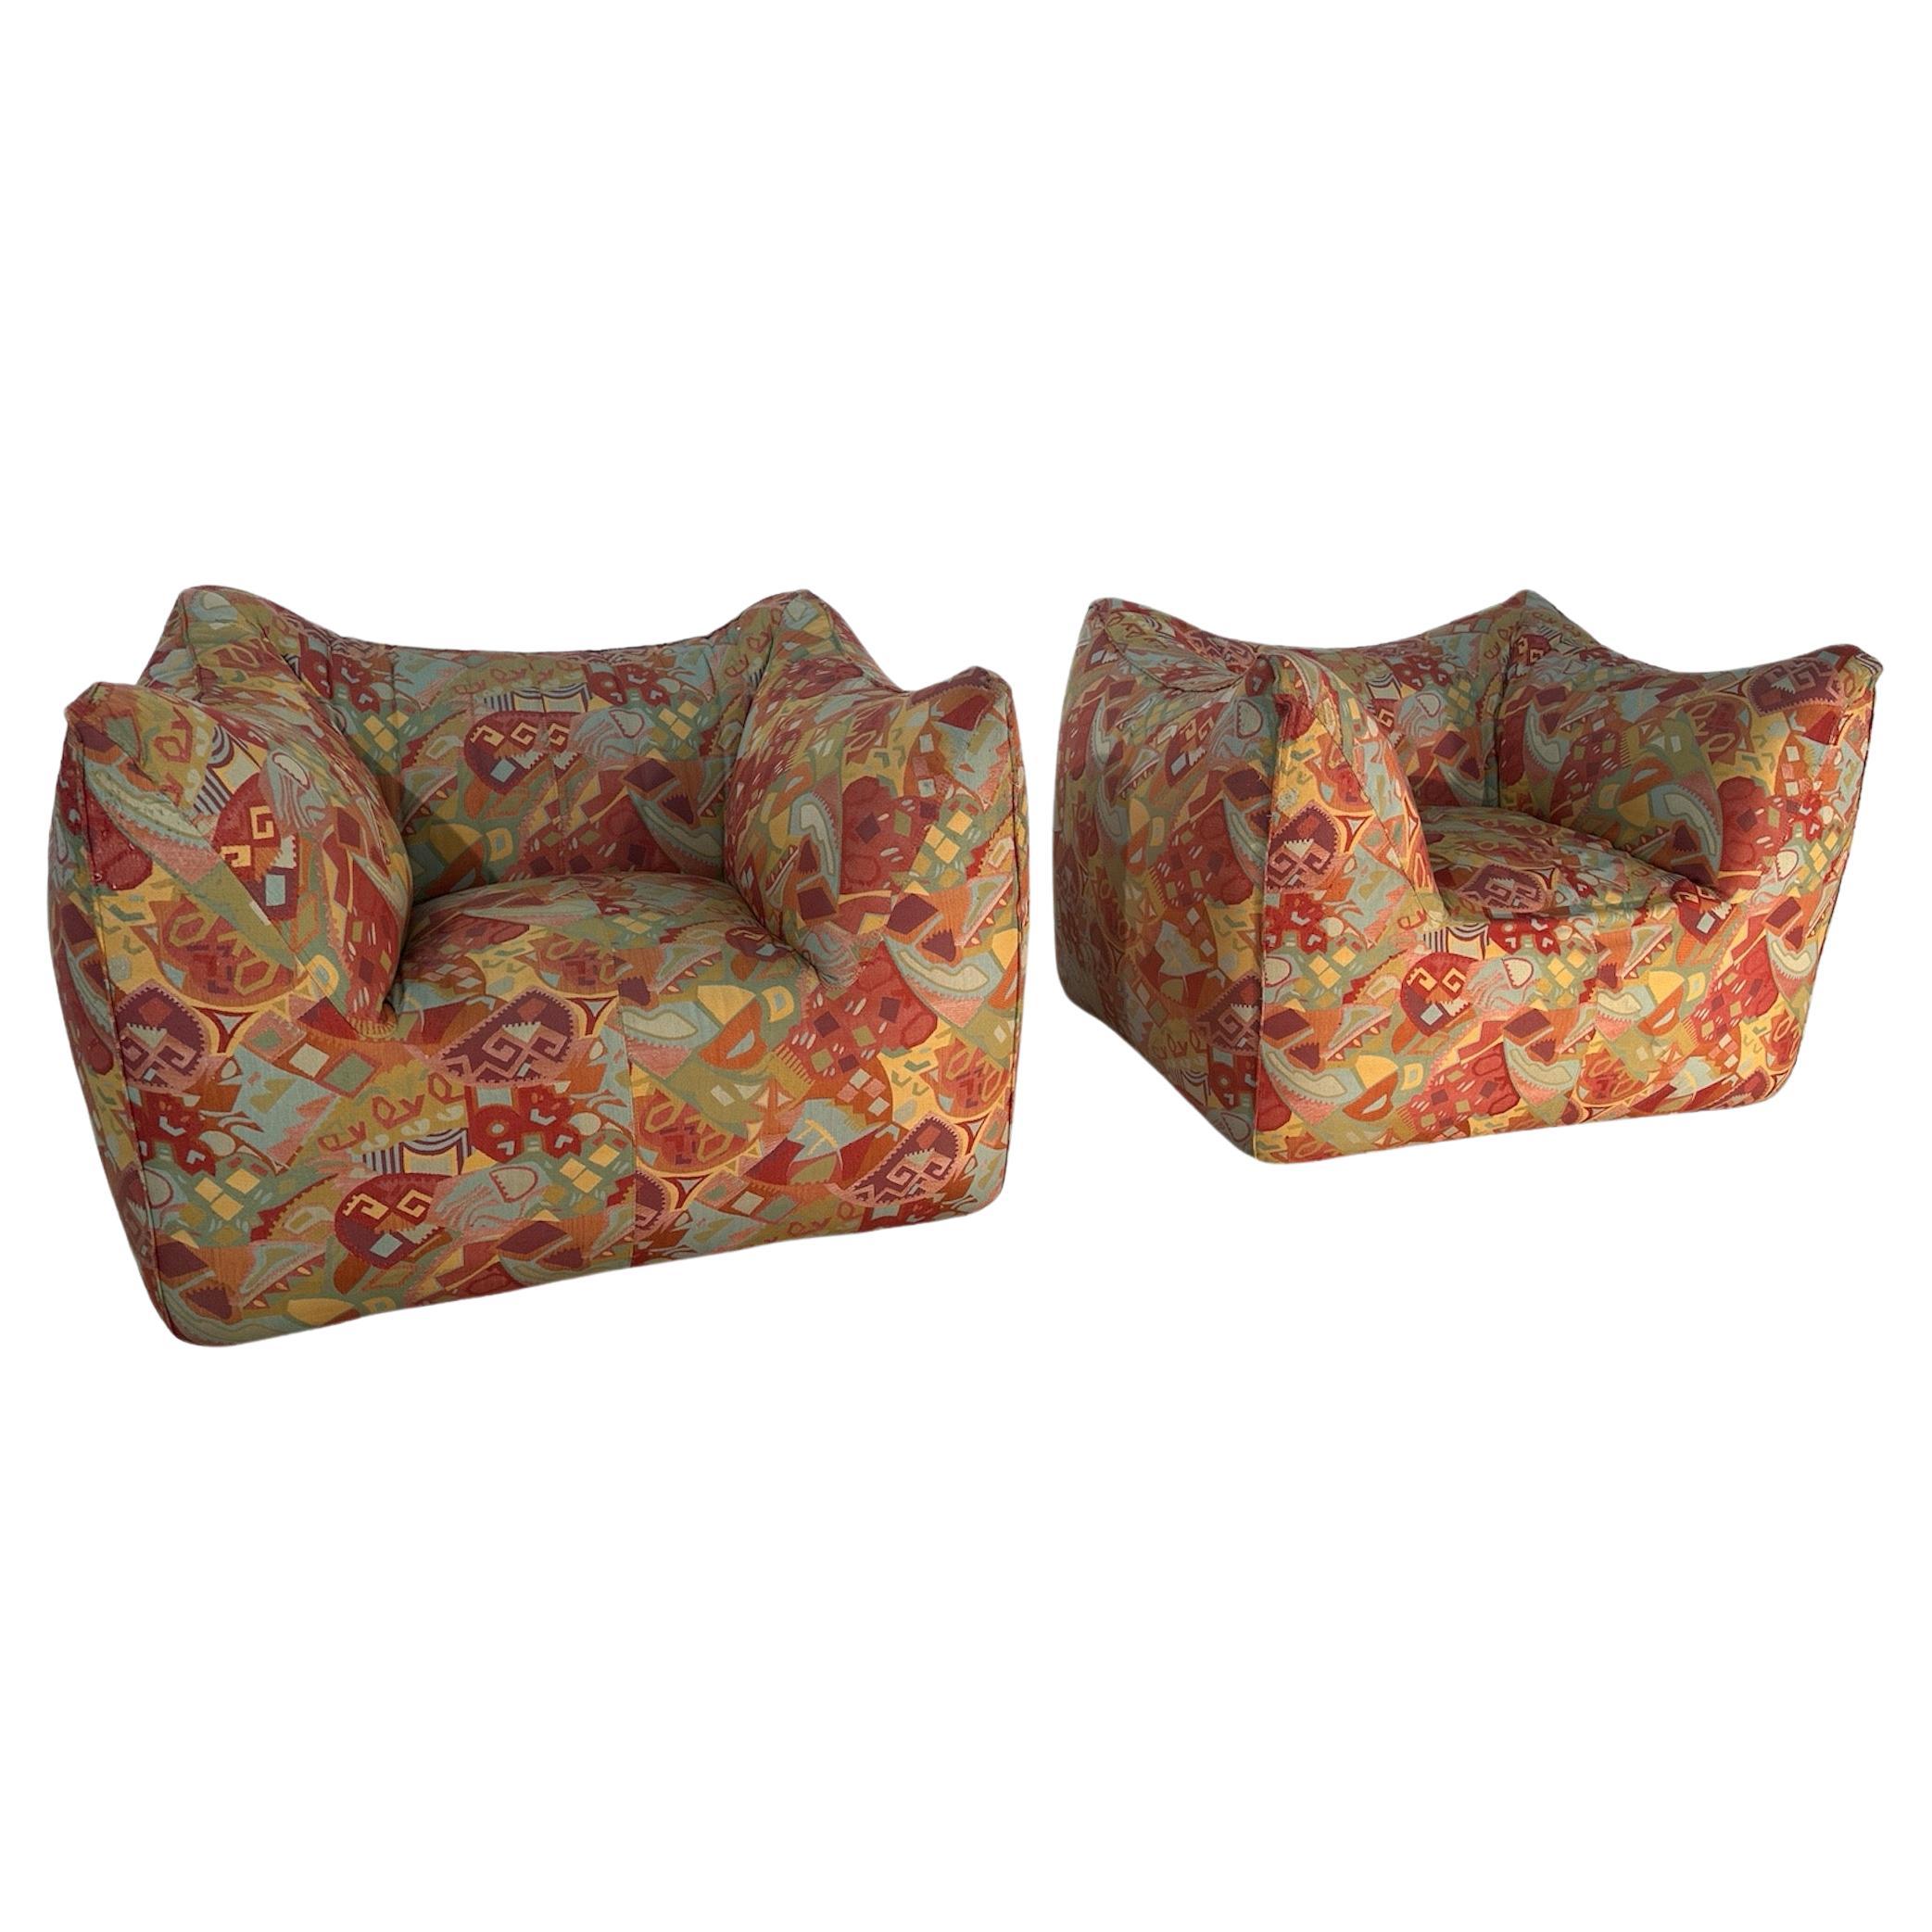 Pair of 2 "Le Bambole" Armchair Designed by Mario Bellini for C&B, 1972 For Sale